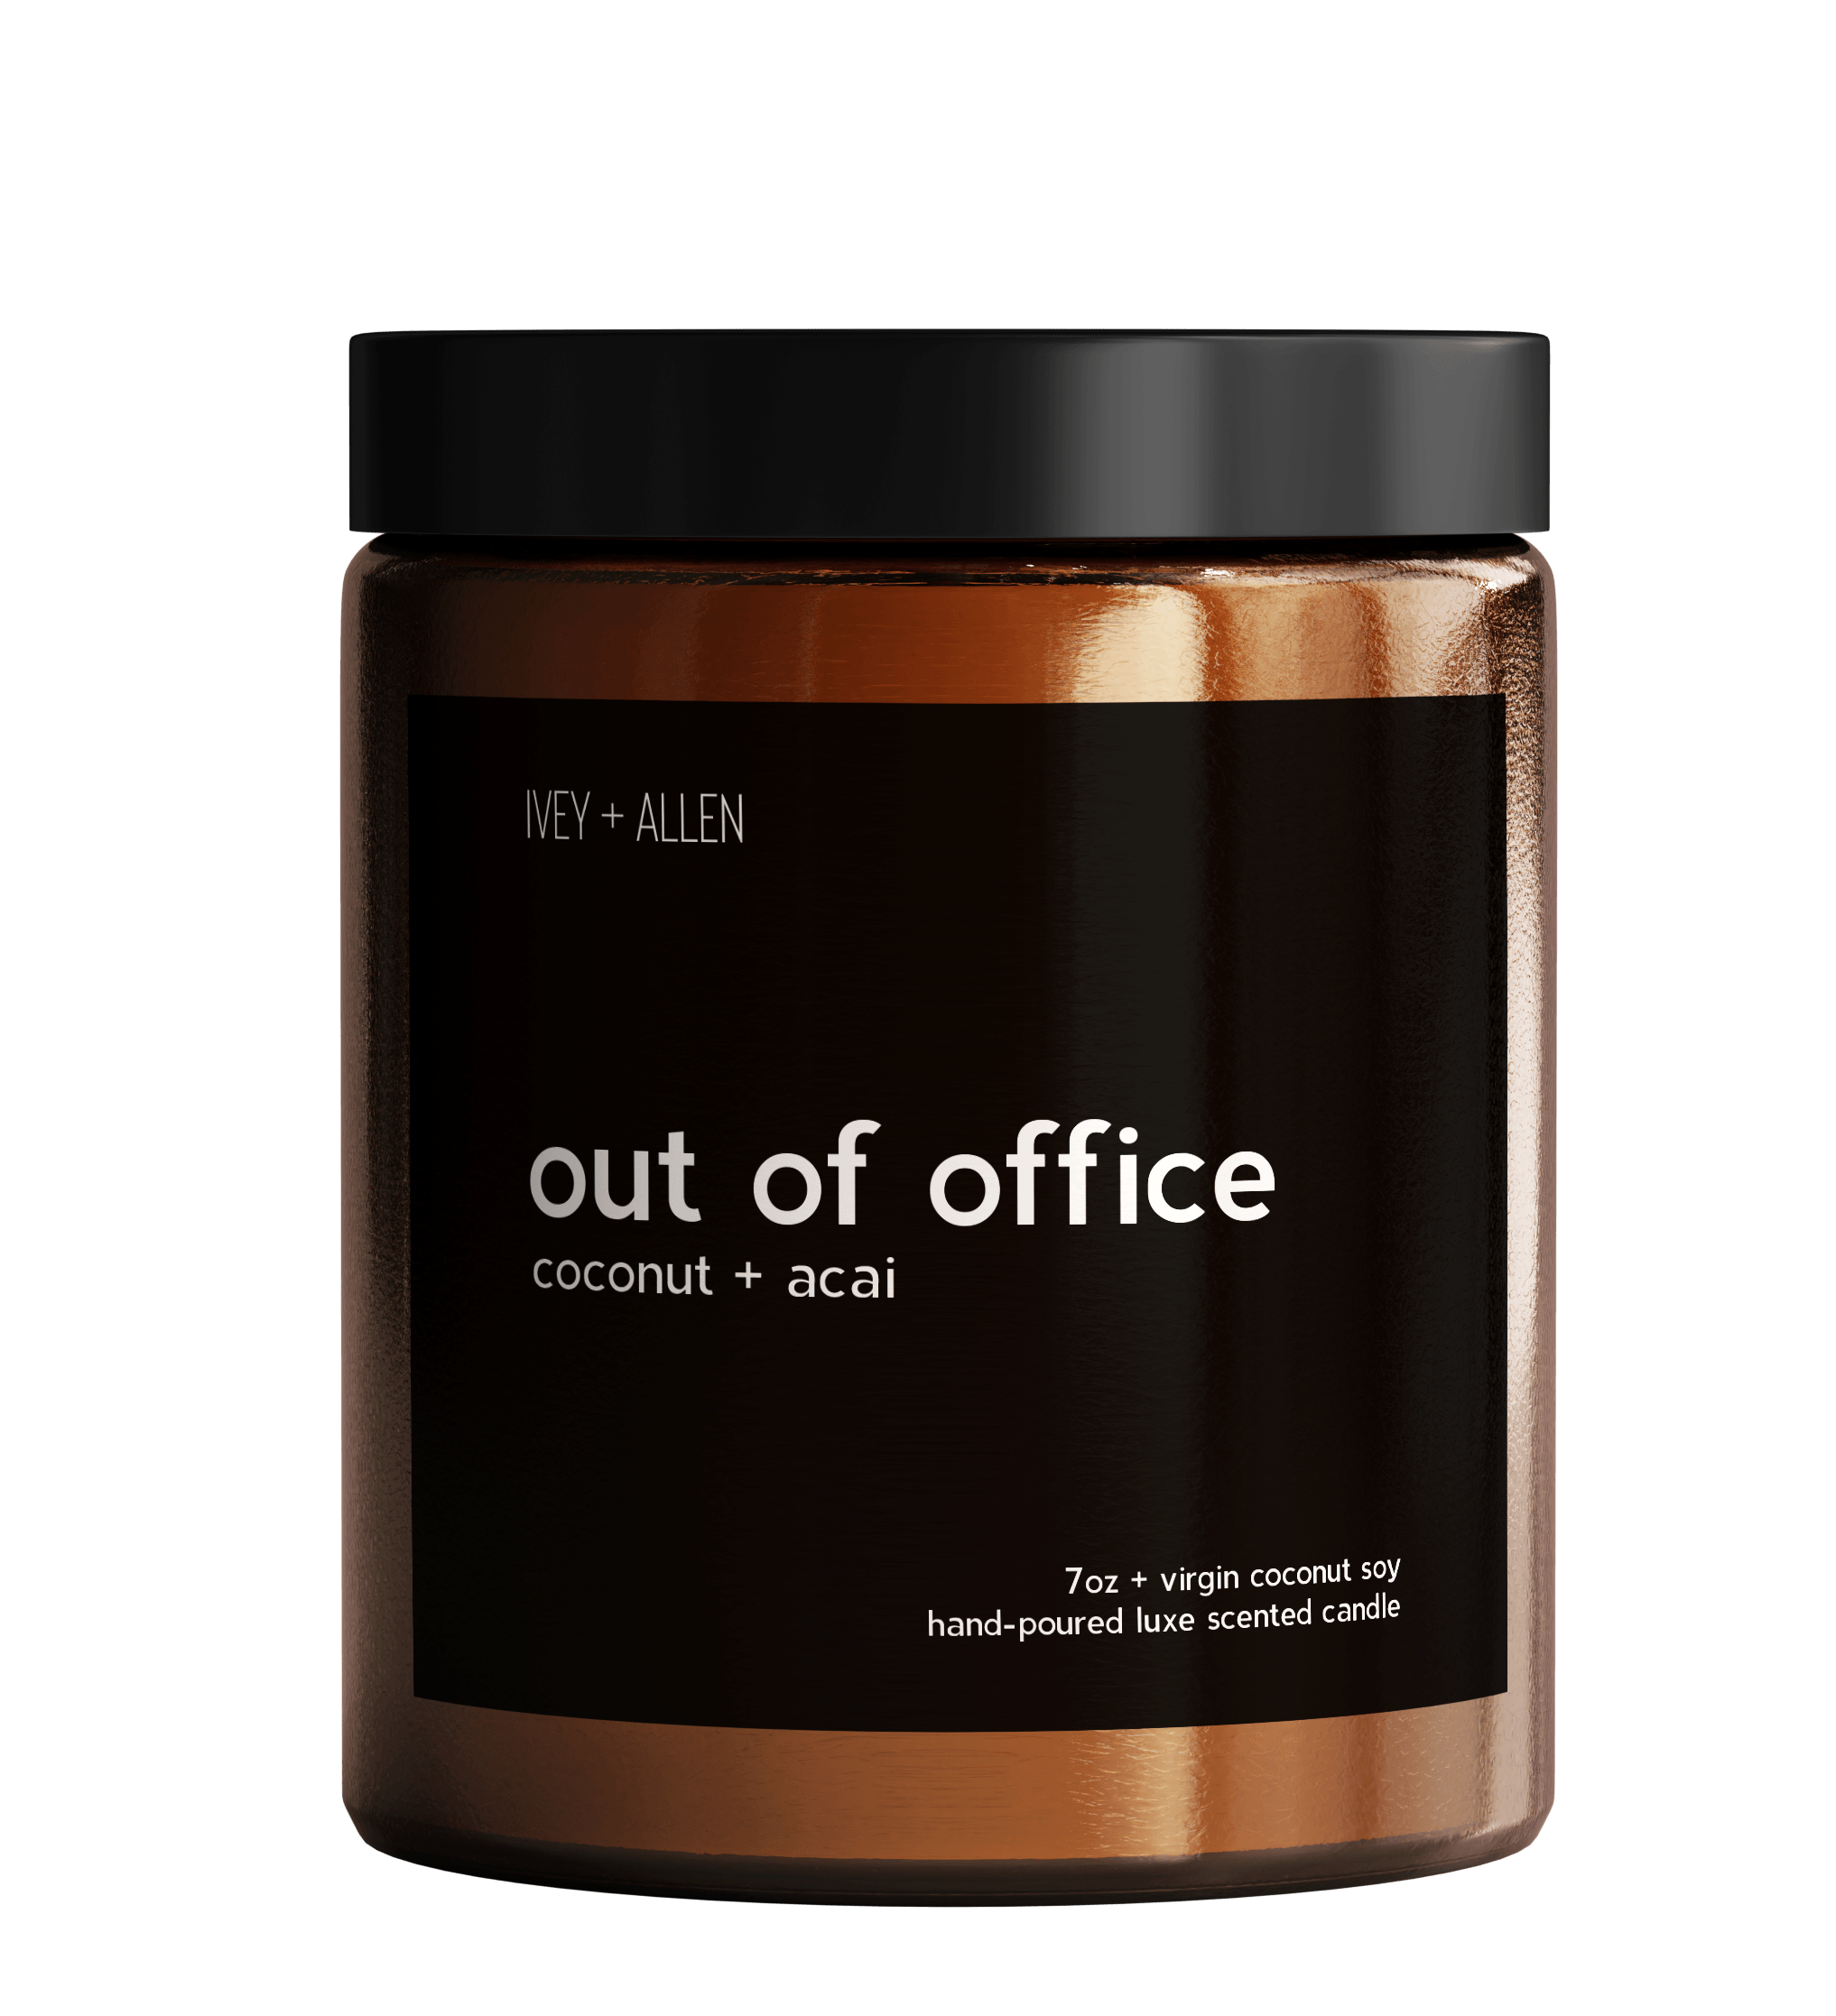 out of office - IVEY + ALLEN